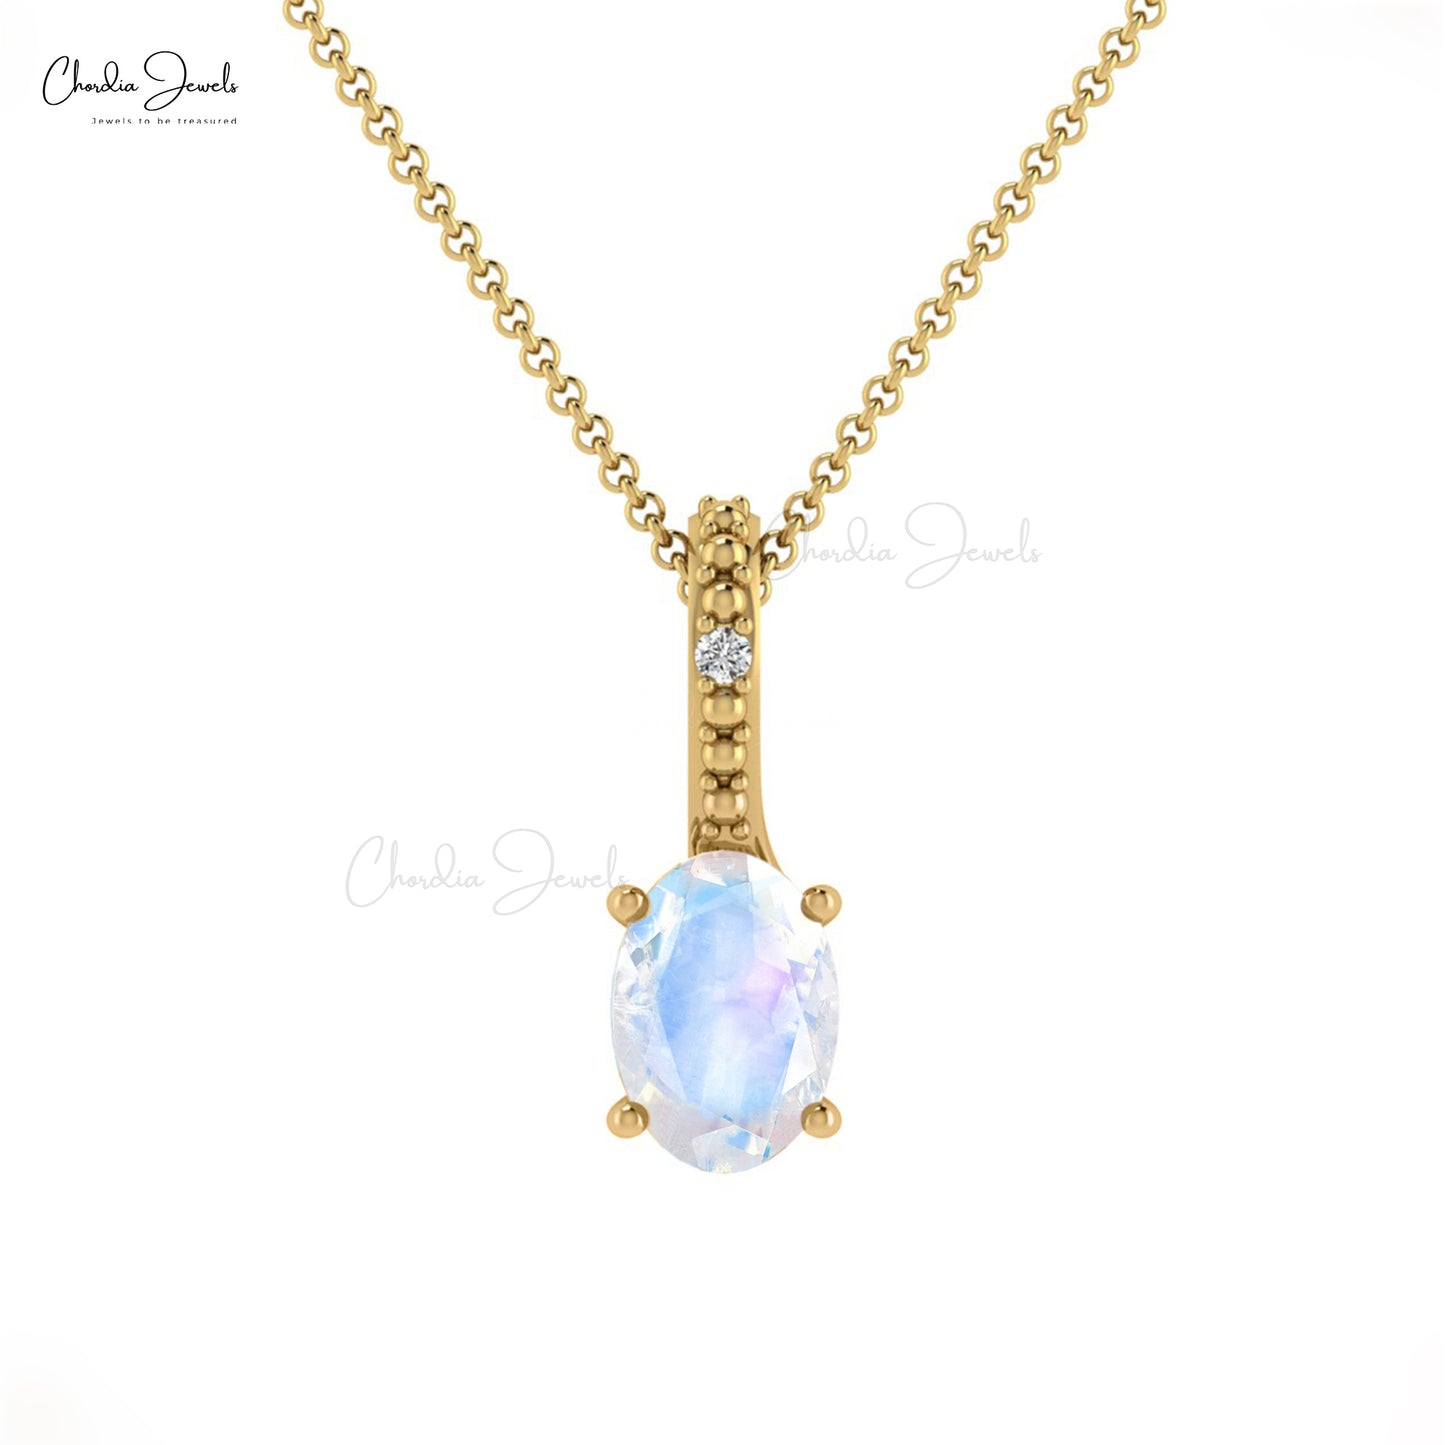 Load image into Gallery viewer, Fashionable Minimalist Authentic Rainbow Moonstone Gemstone Hidden Bail Pendant Necklace 14k Pure Gold Diamond Pendant Anniversary Gift For Wife
